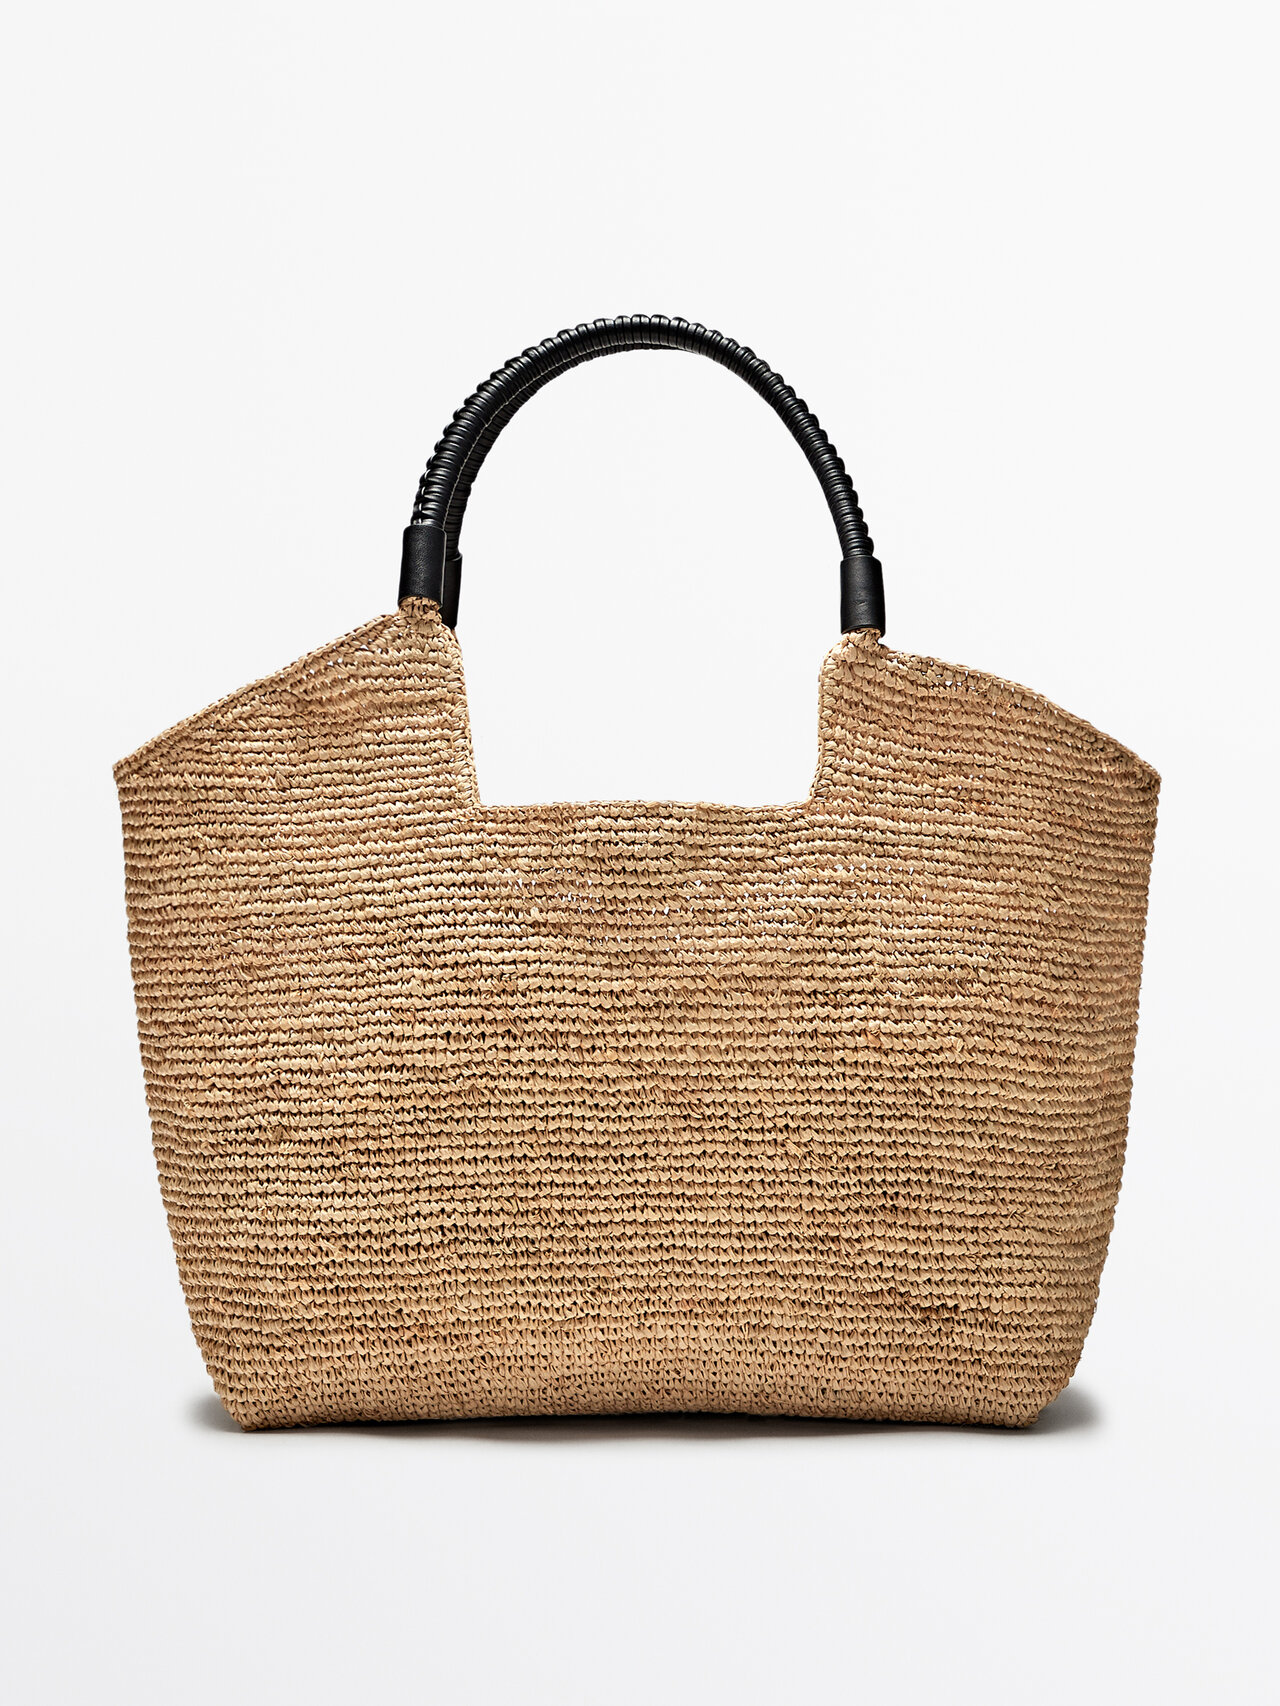 Massimo Dutti Raffia Tote Bag With Leather Handles In Beige